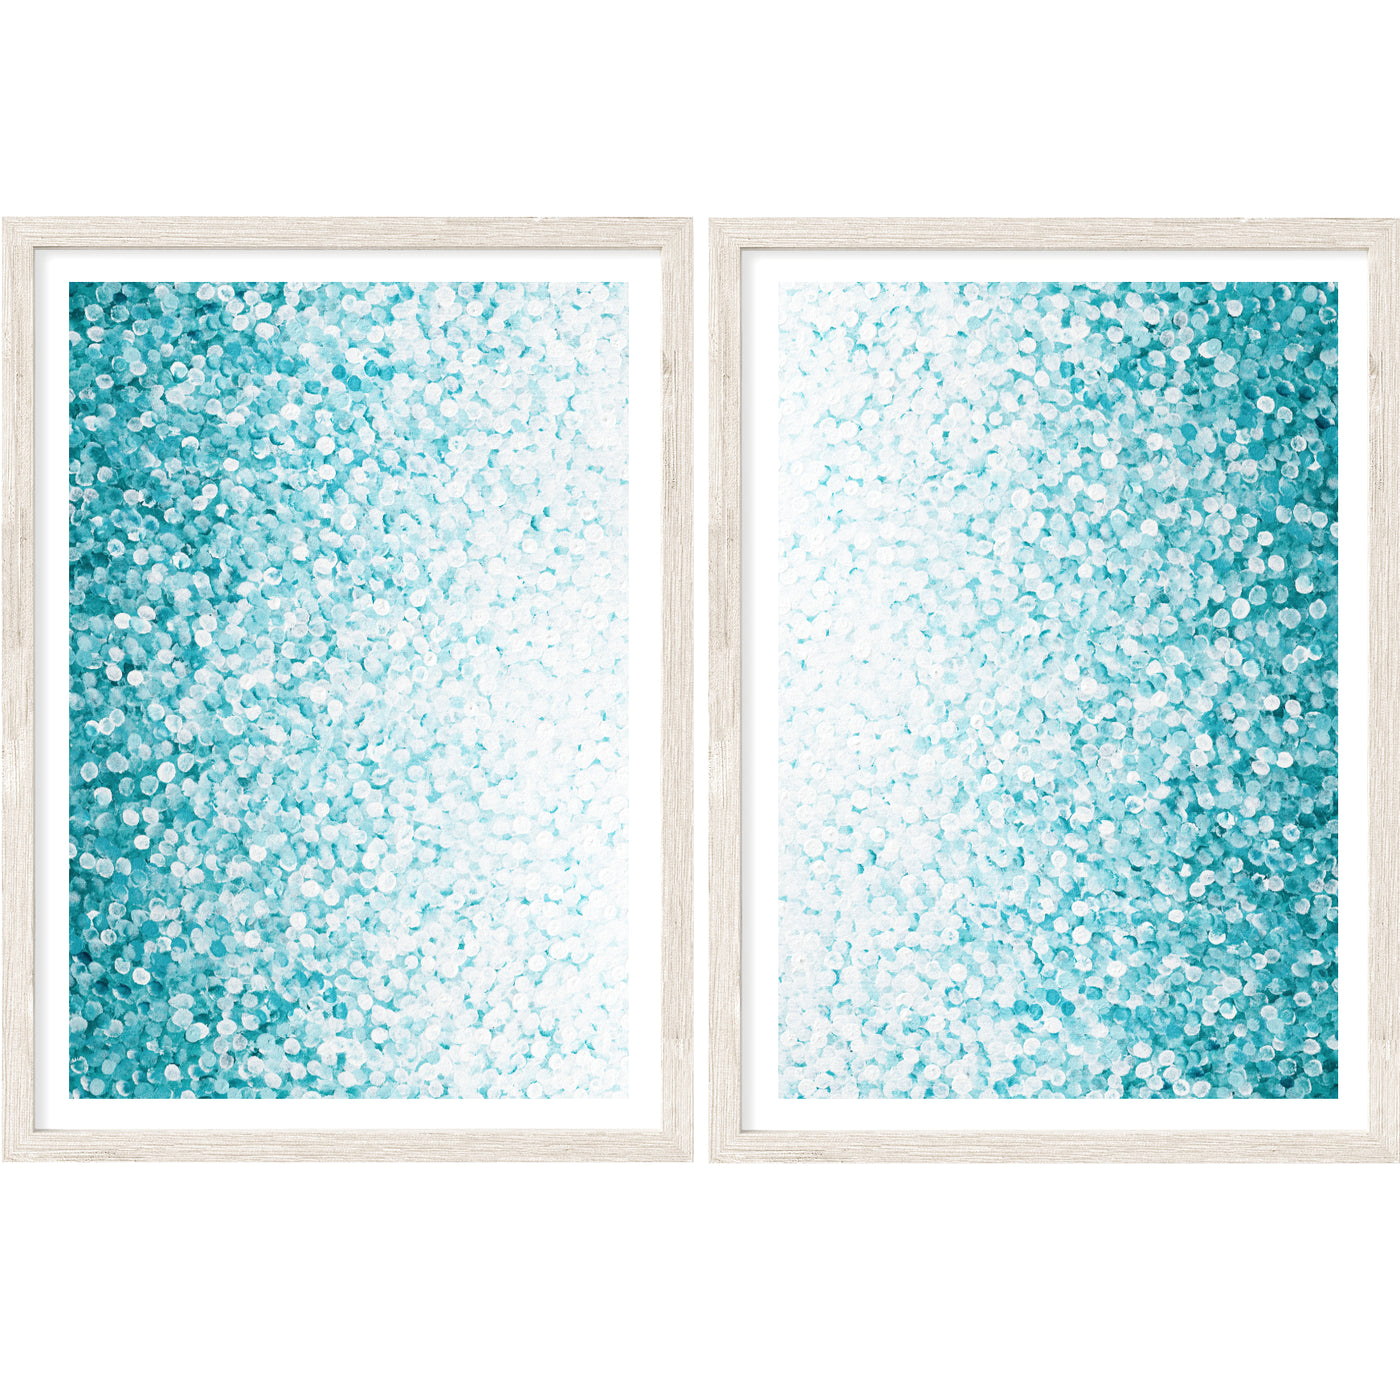 Turquoise Shimmer Set of 2